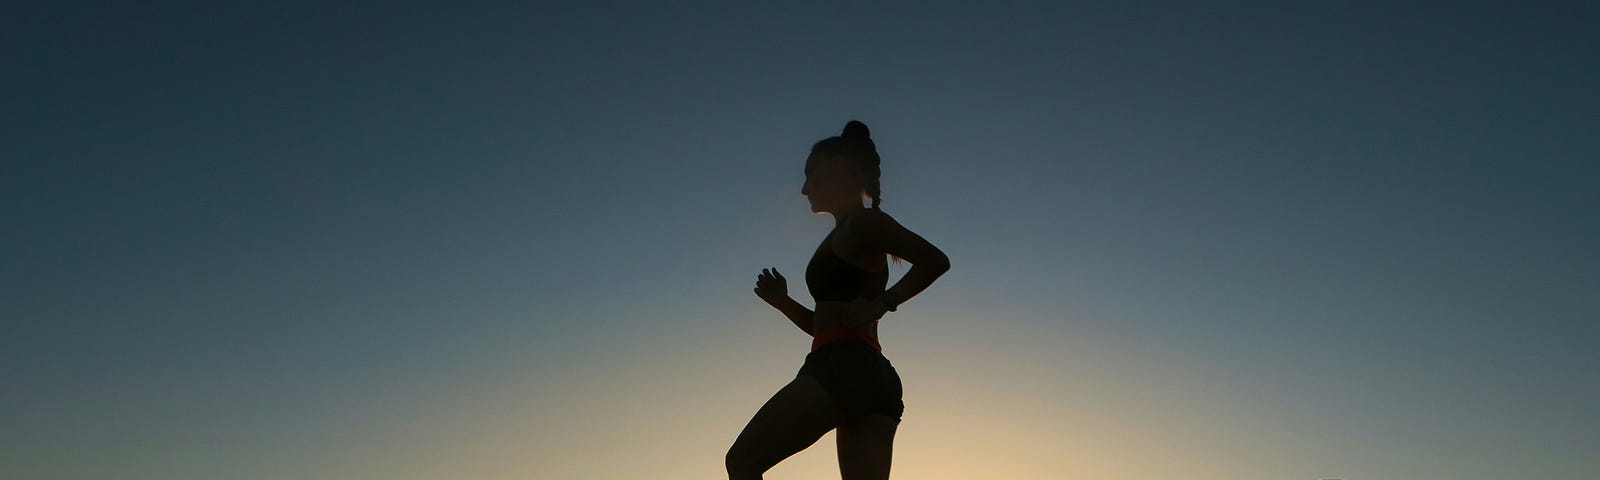 silhouette of a runner on a rocky ledge against a glowing sky